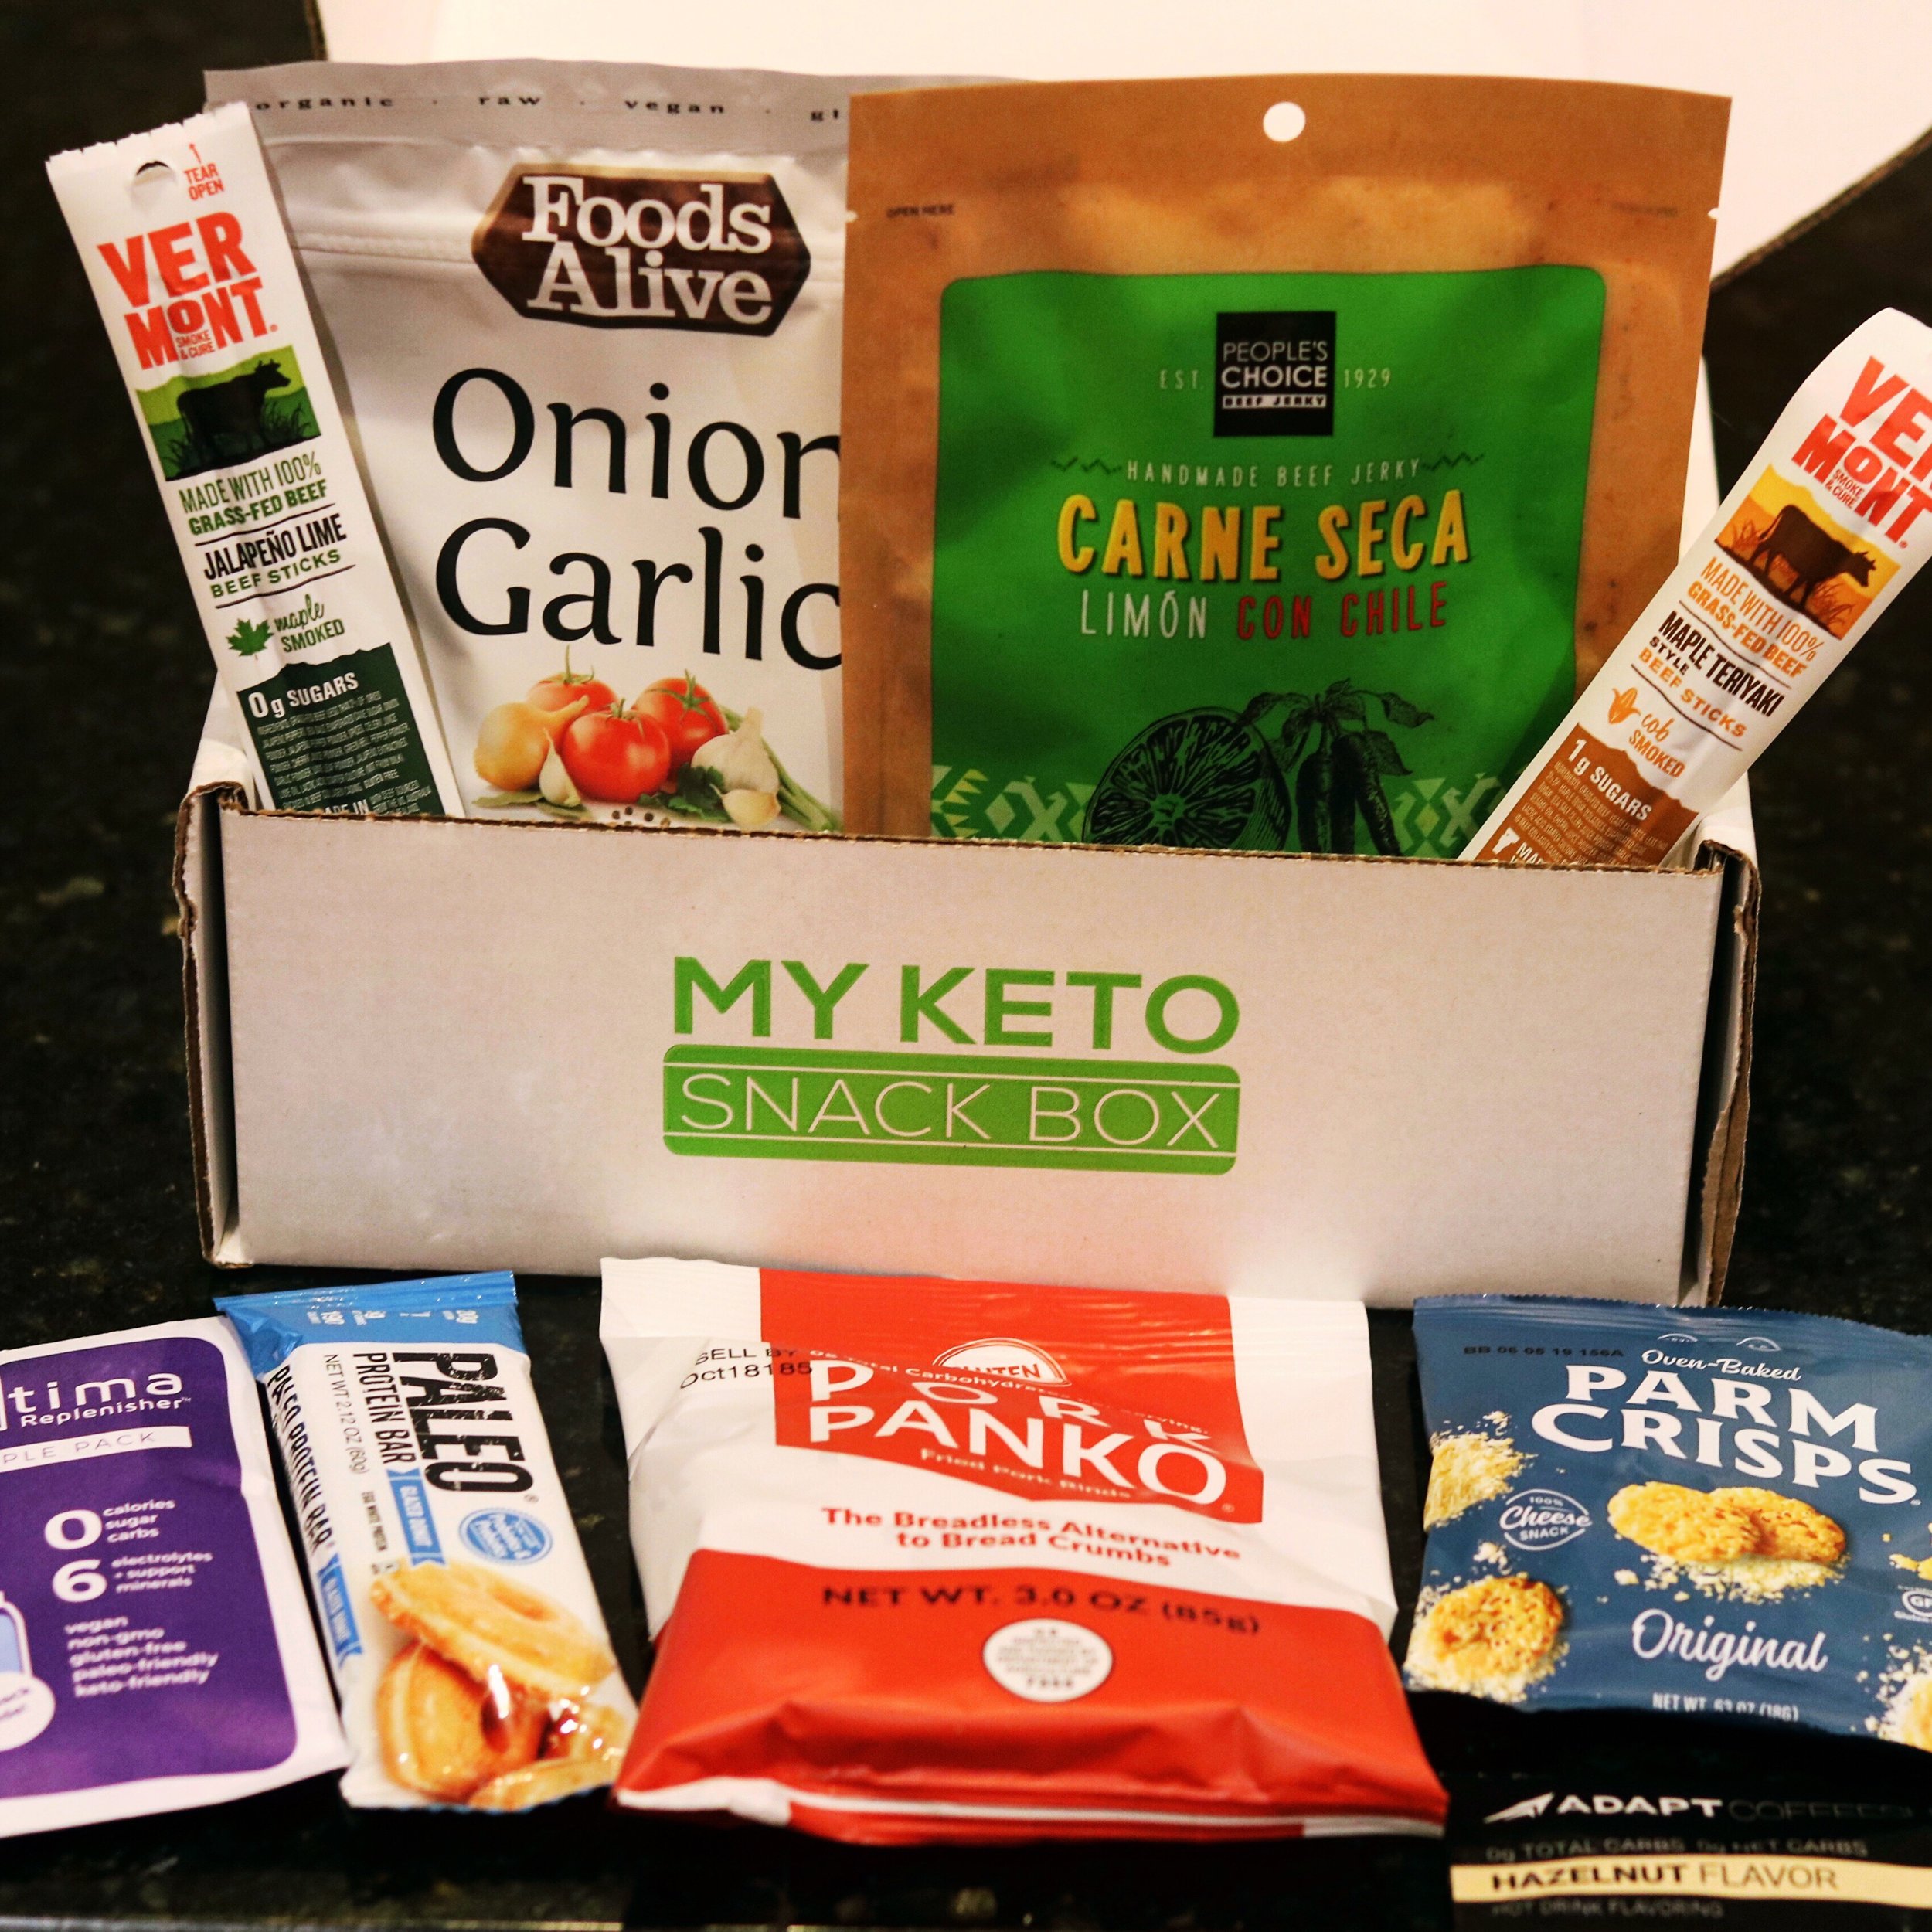 An assortment of items for My Keto Snack Box